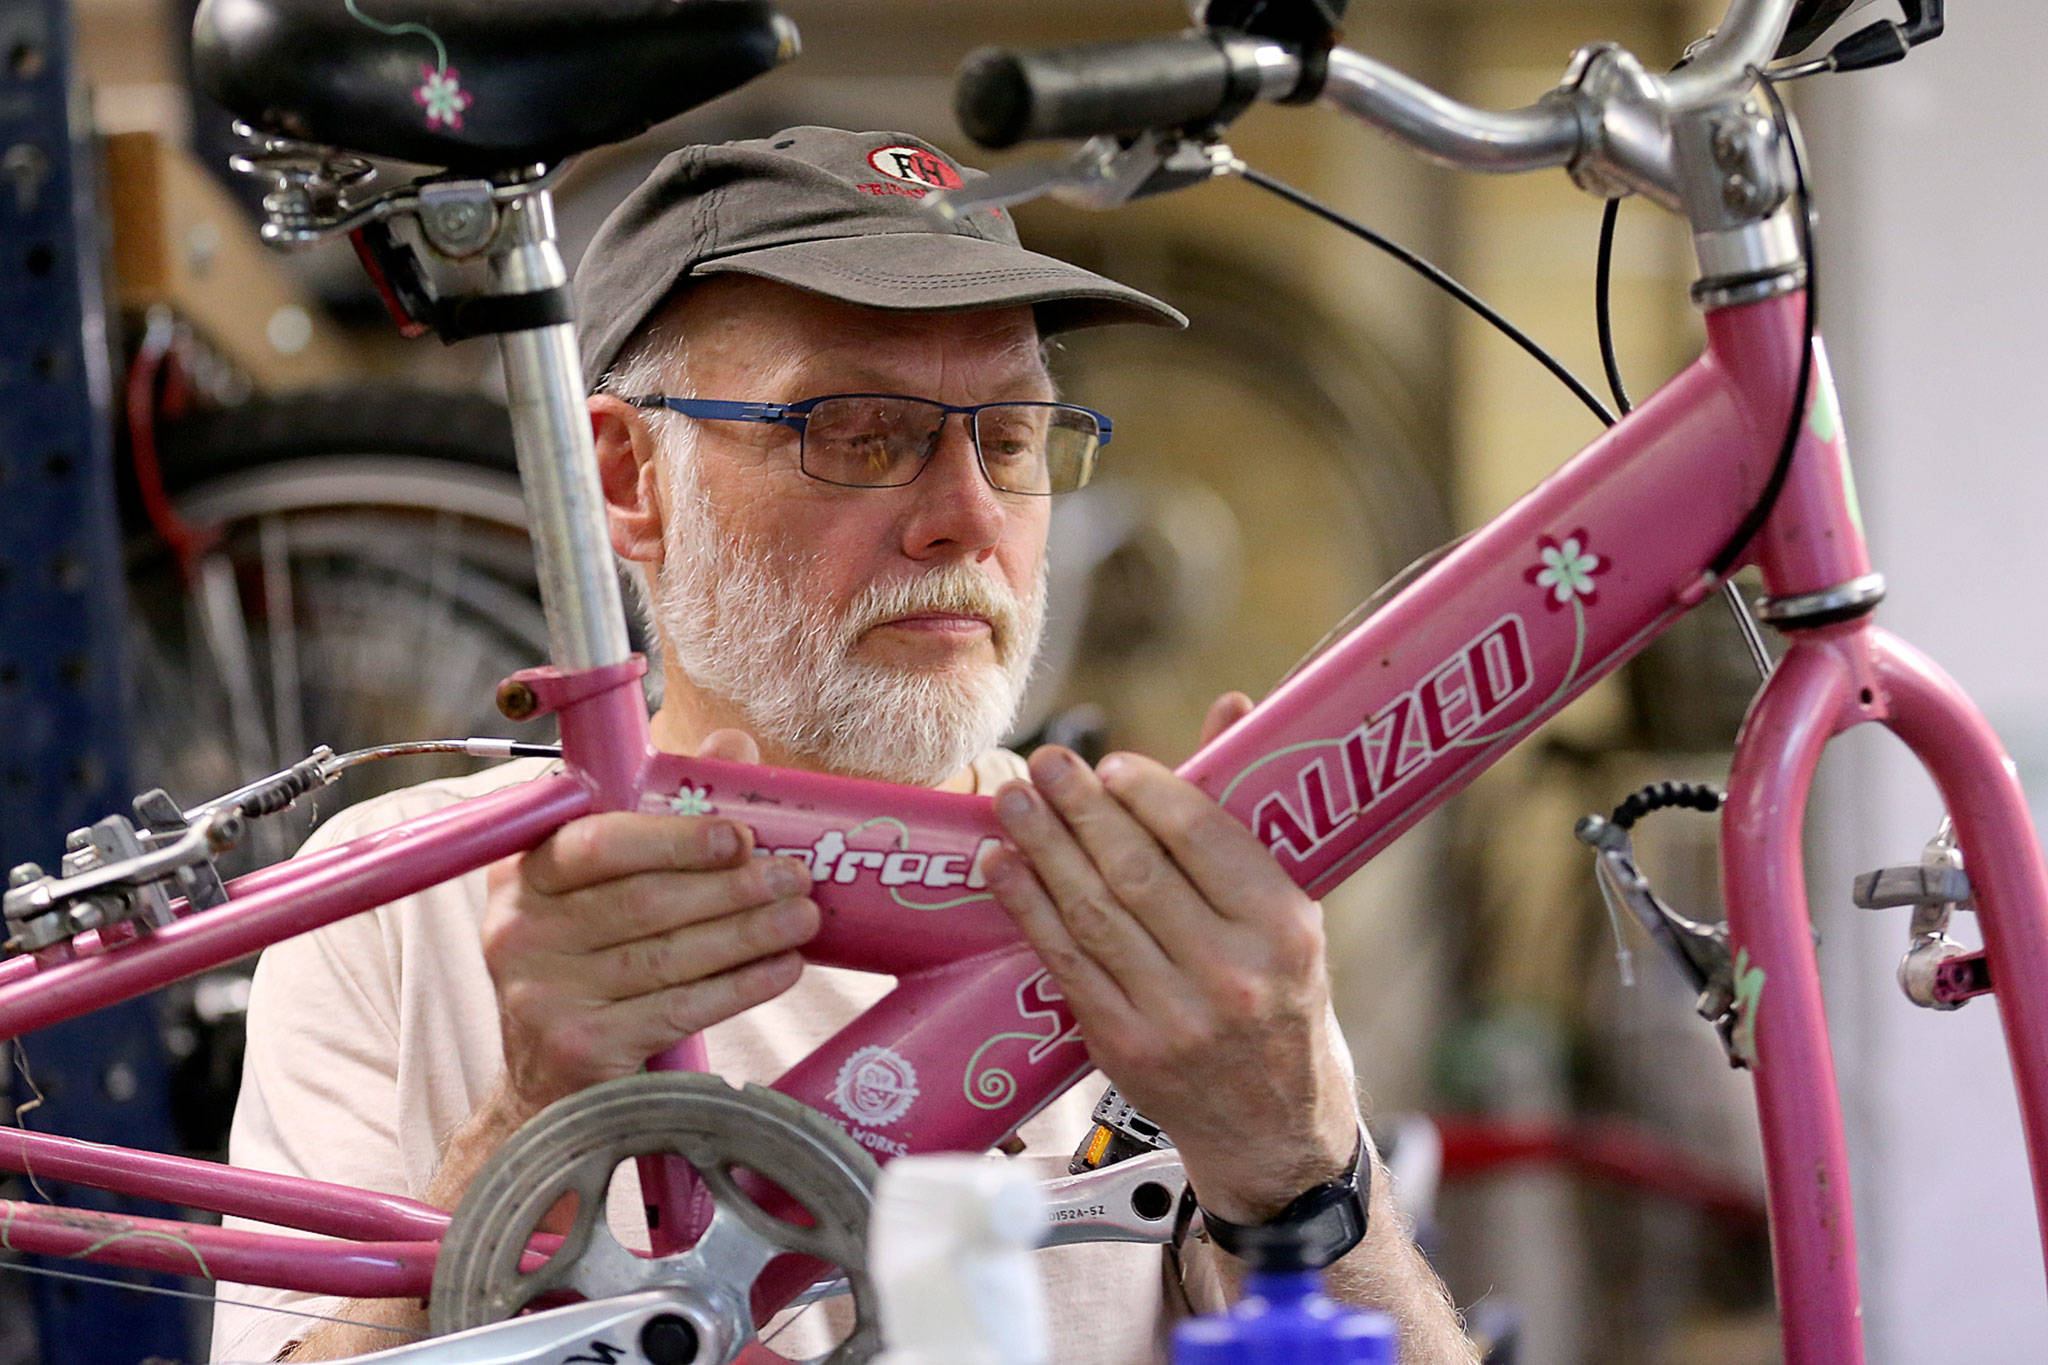 Don Sperlin works on a bike May 30, 2019 at Sharing Wheels Community Bike Shop in Everett. The nonprofit is organizing weekly volunteer work parties Tuesday and Thursday to fix children’s bikes through Dec. 10. (Kevin Clark / Herald file)